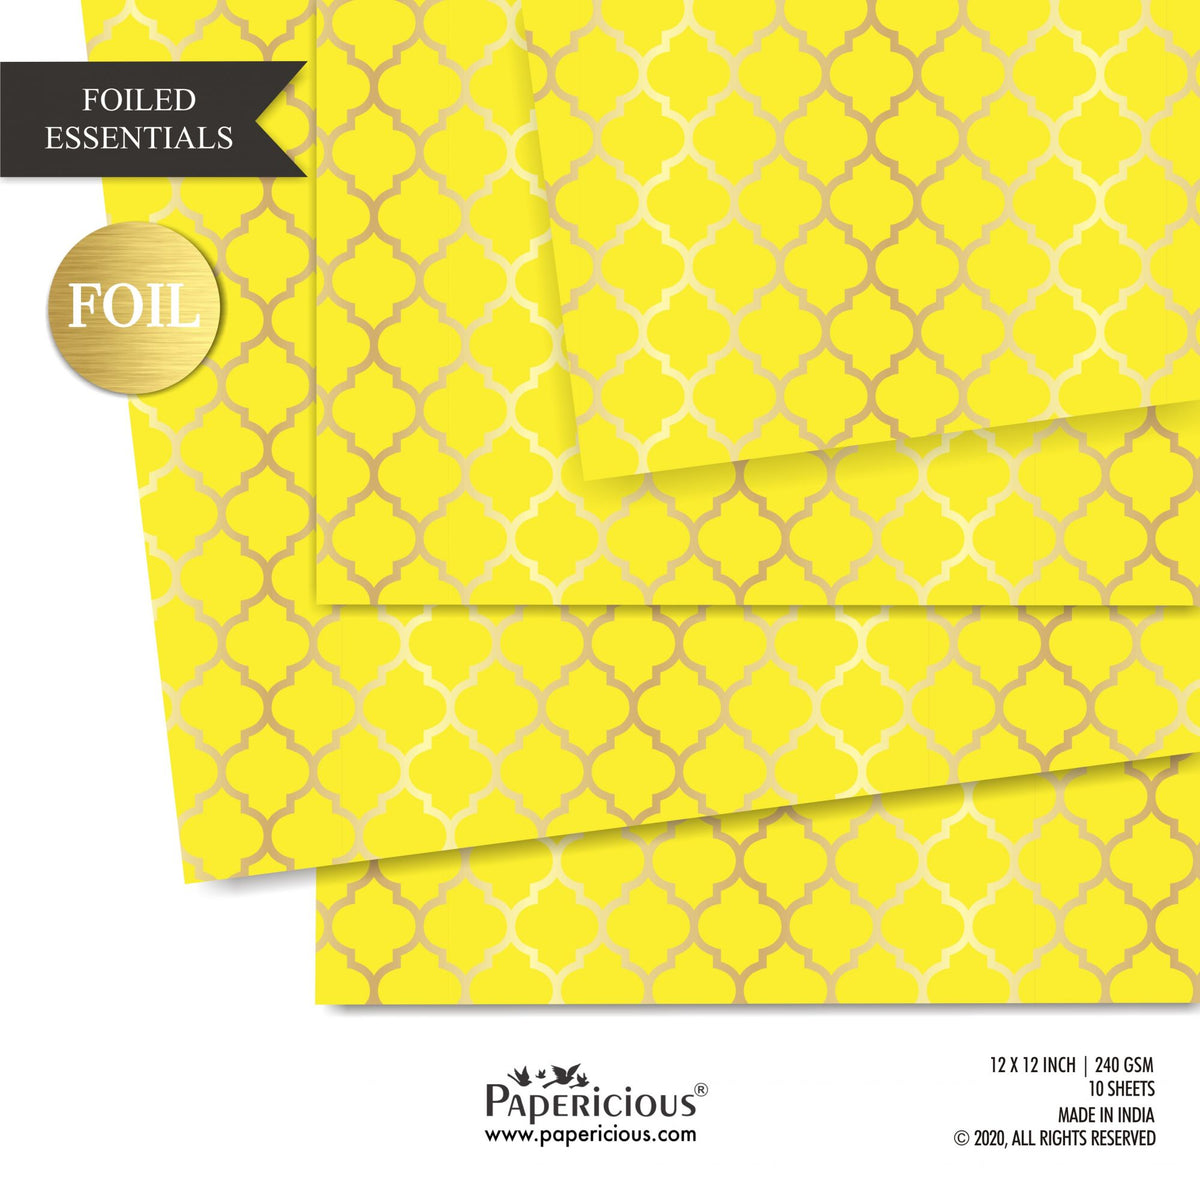 Papericious - Golden Foiled Pattern Scrapbook Papers 12x12 inch / 10 sheets / #12520